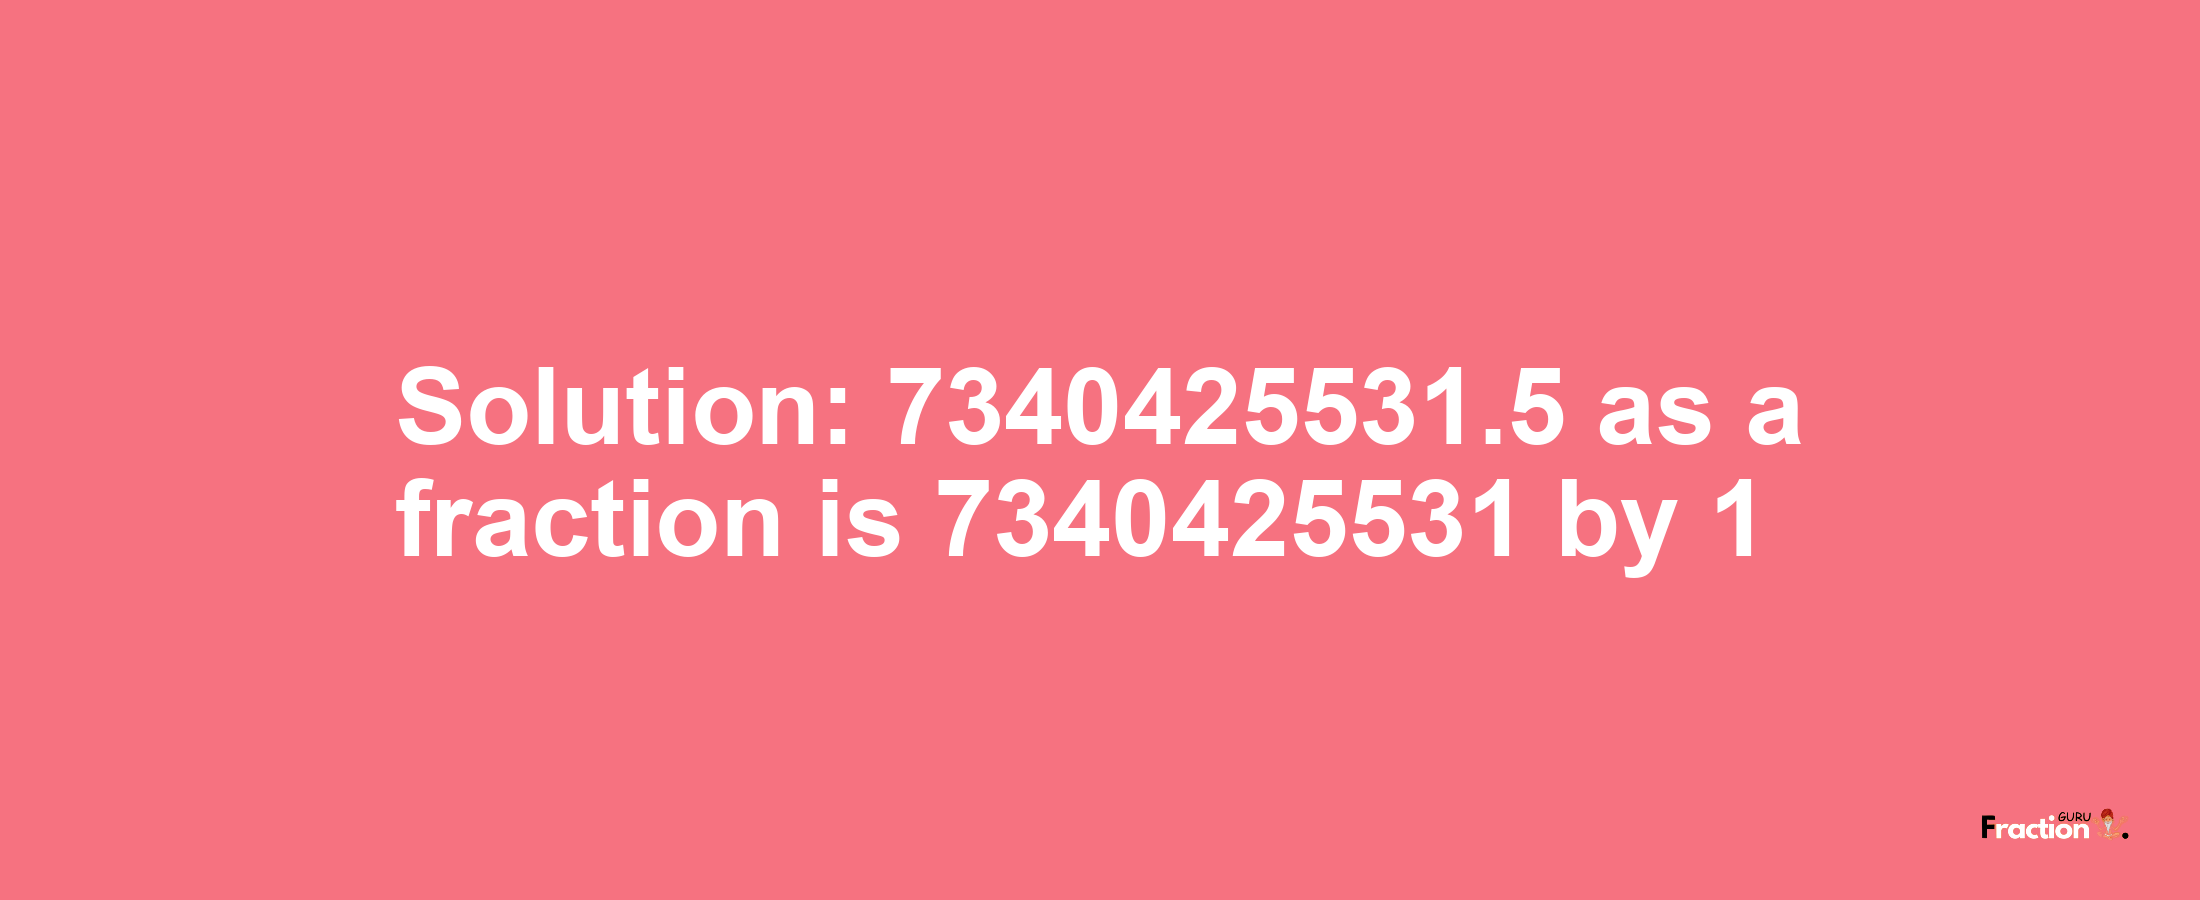 Solution:7340425531.5 as a fraction is 7340425531/1